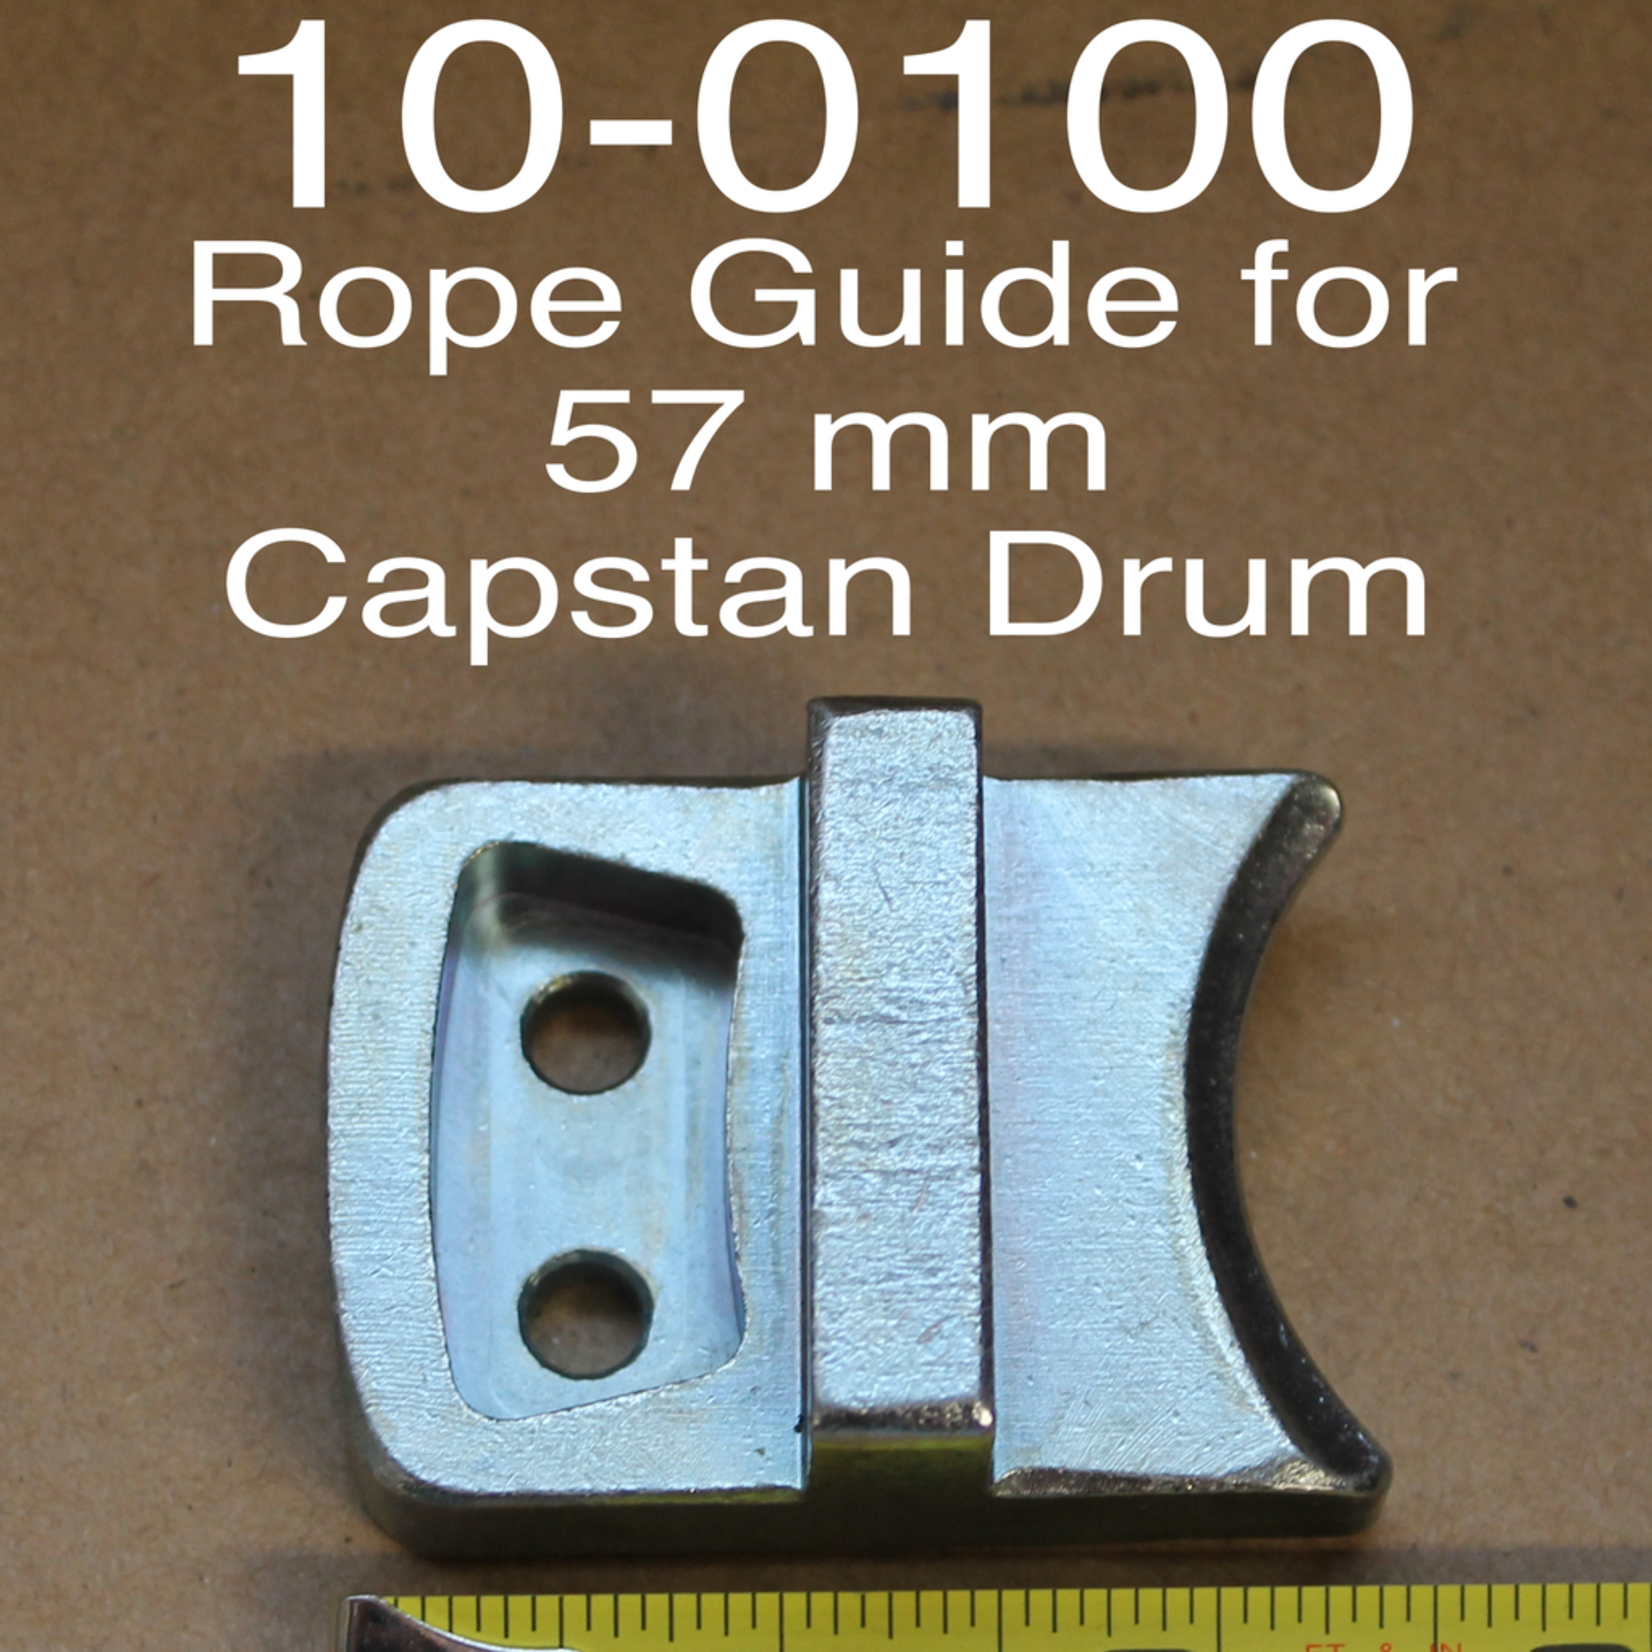 PORTABLE WINCH CO. Rope Guide For Capstan Drum 57 MM